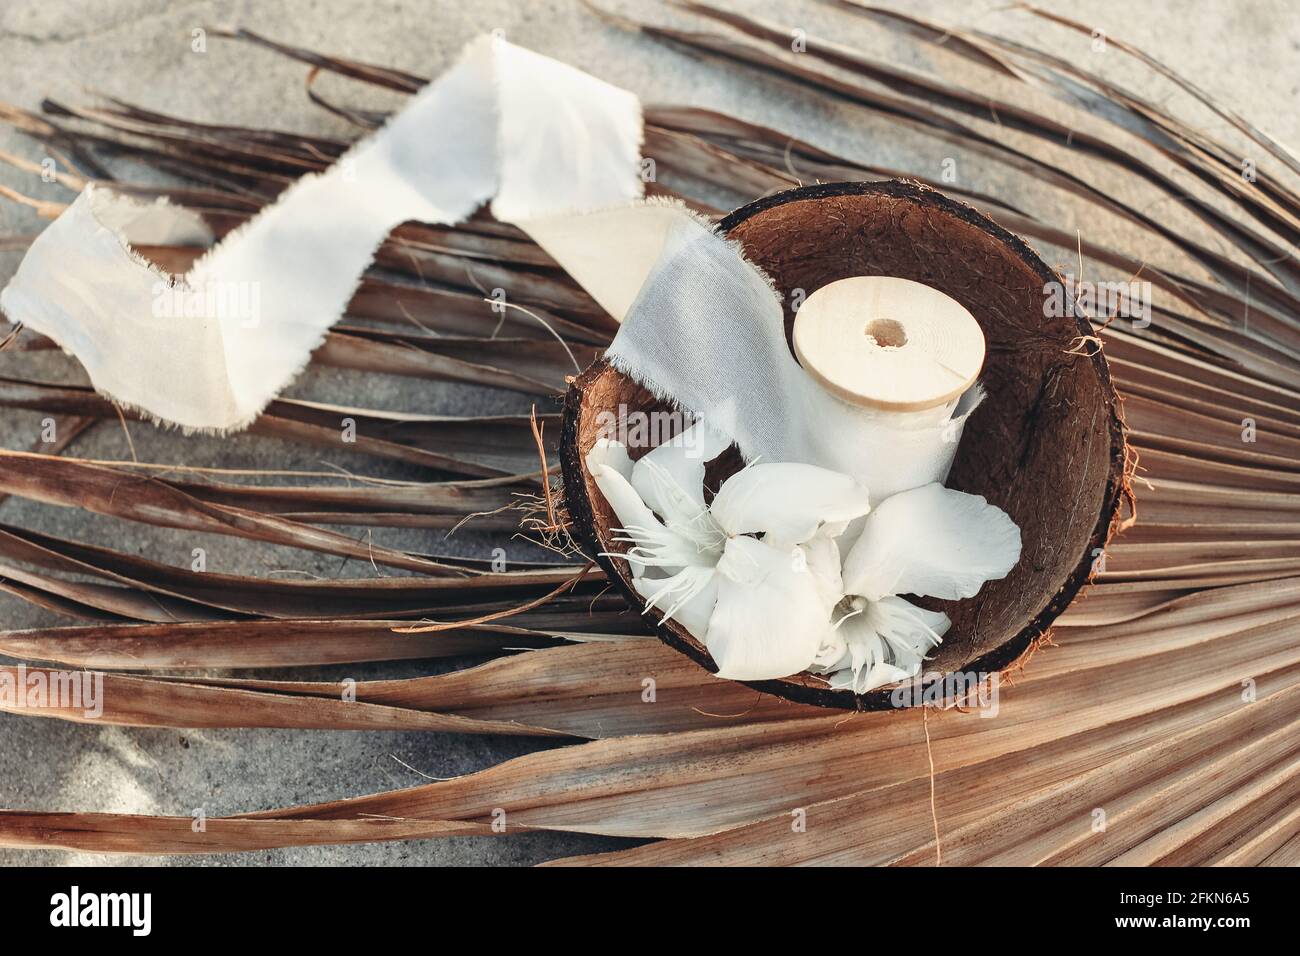 Summer tropical lifestyle scene. Oleander blossoms and white silk ribbons spools in coconut shell. Dry palm leaves. Grunge concrete background in Stock Photo